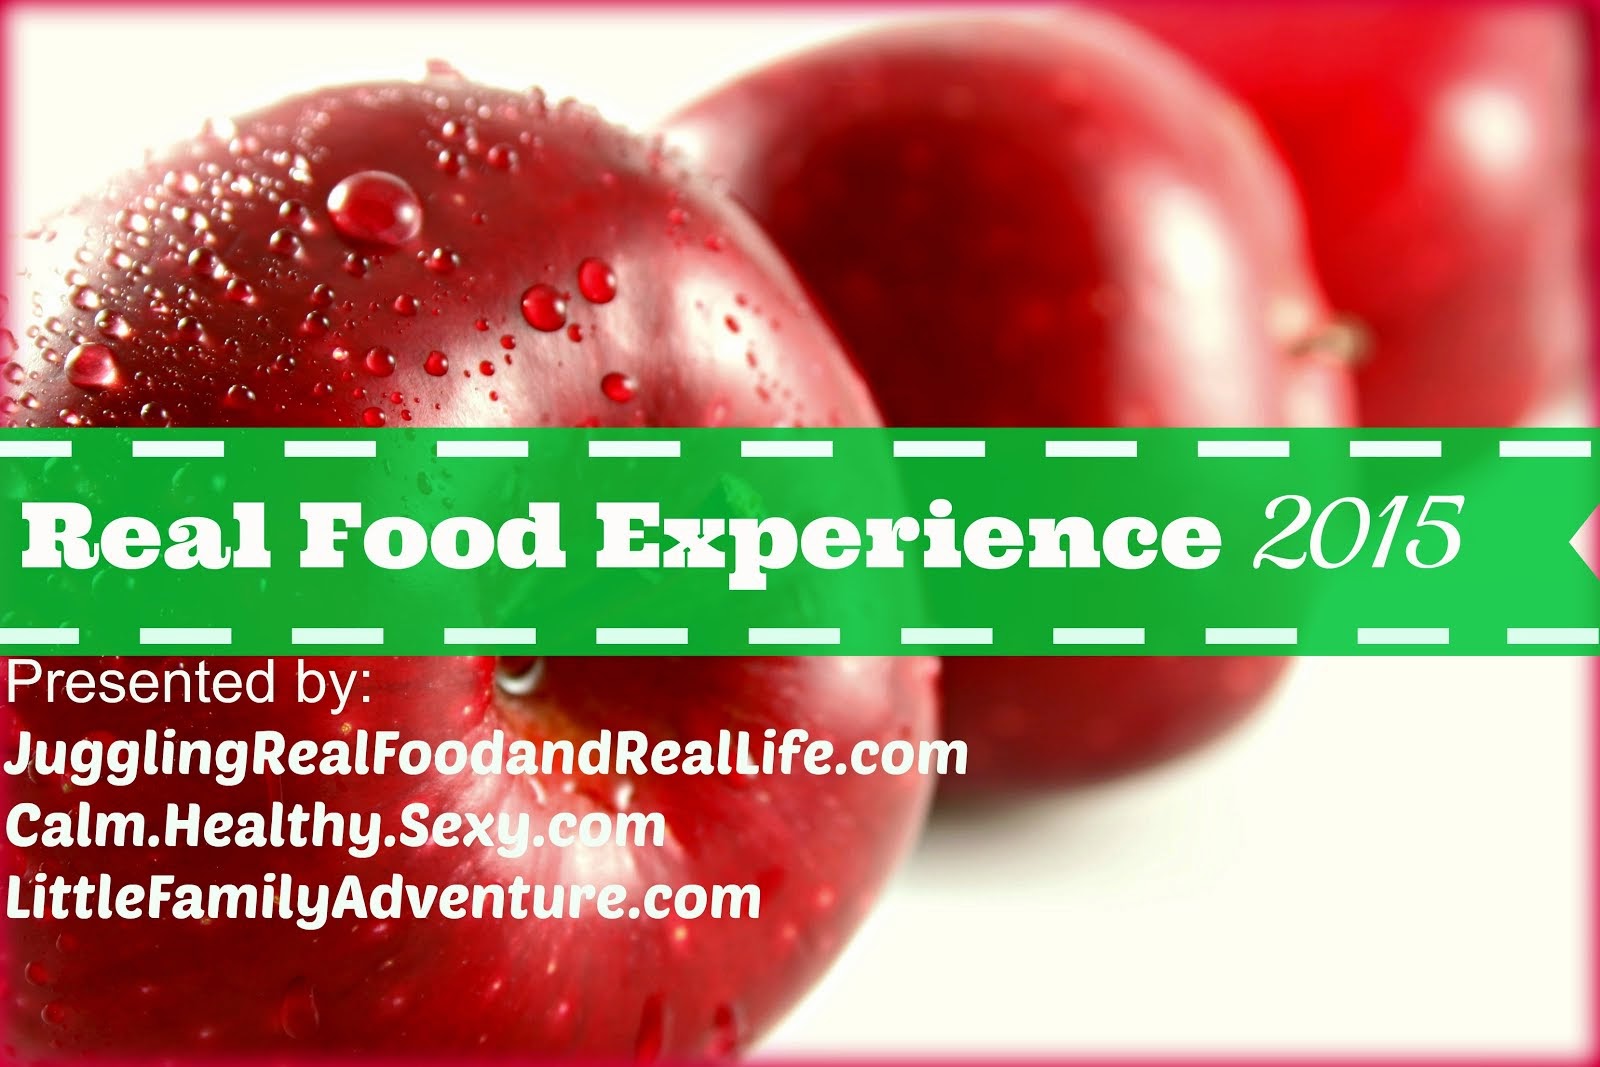 Real Food Experience 2015 – Week 1 Challenge: Eat More Fruits and Vegetables